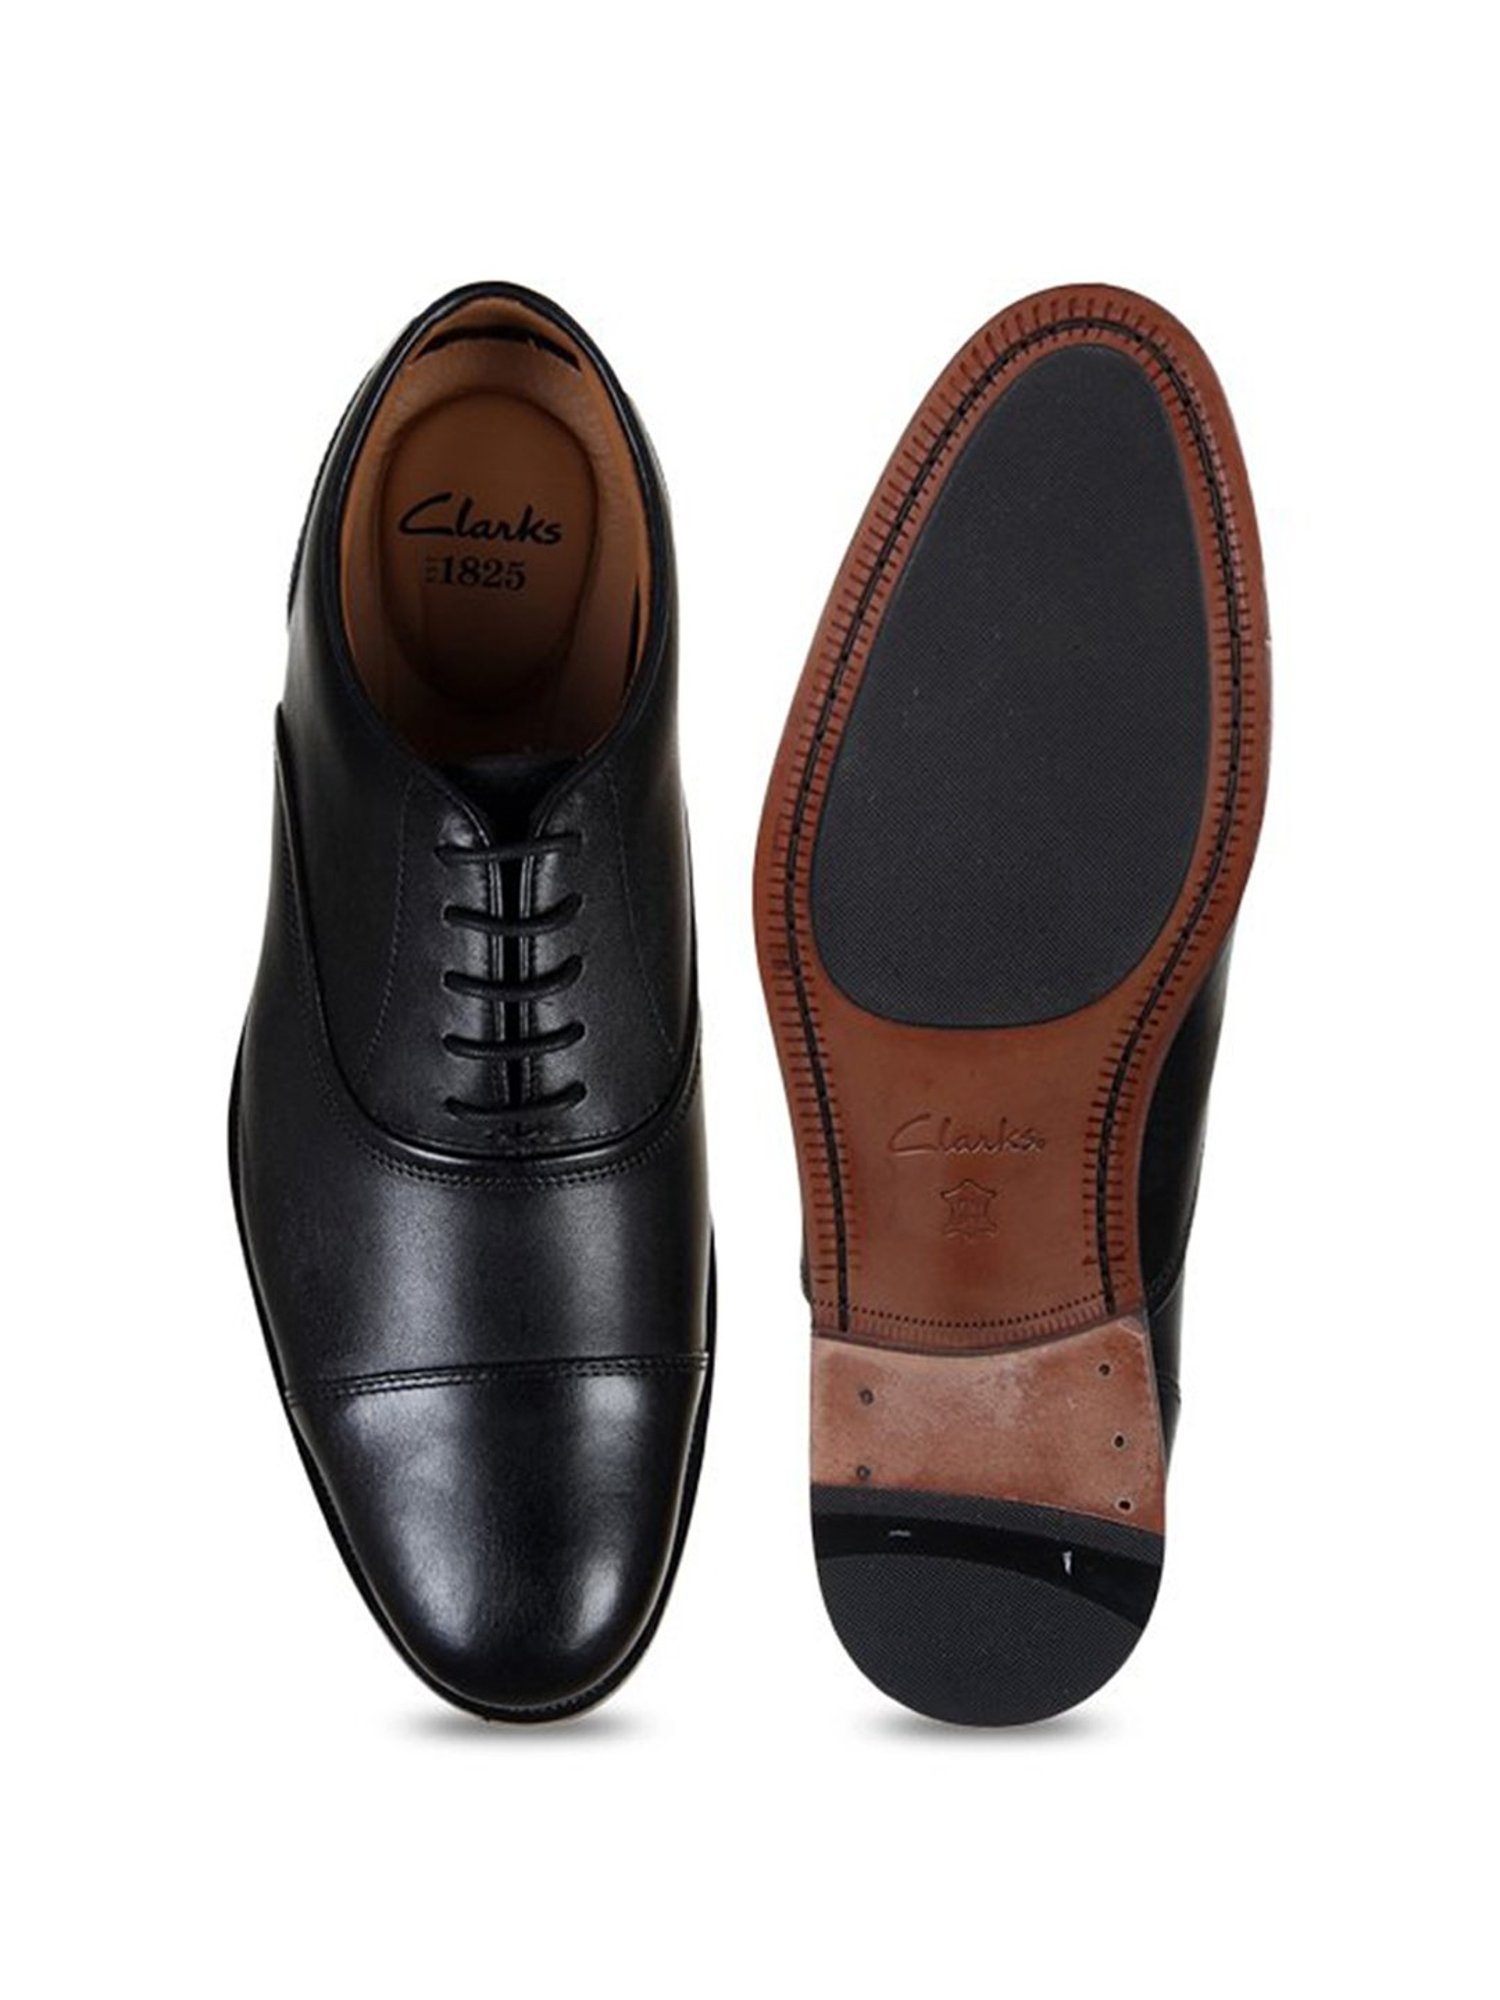 Buy Clarks Black Oxford Shoes for Men at Best Price @ CLiQ